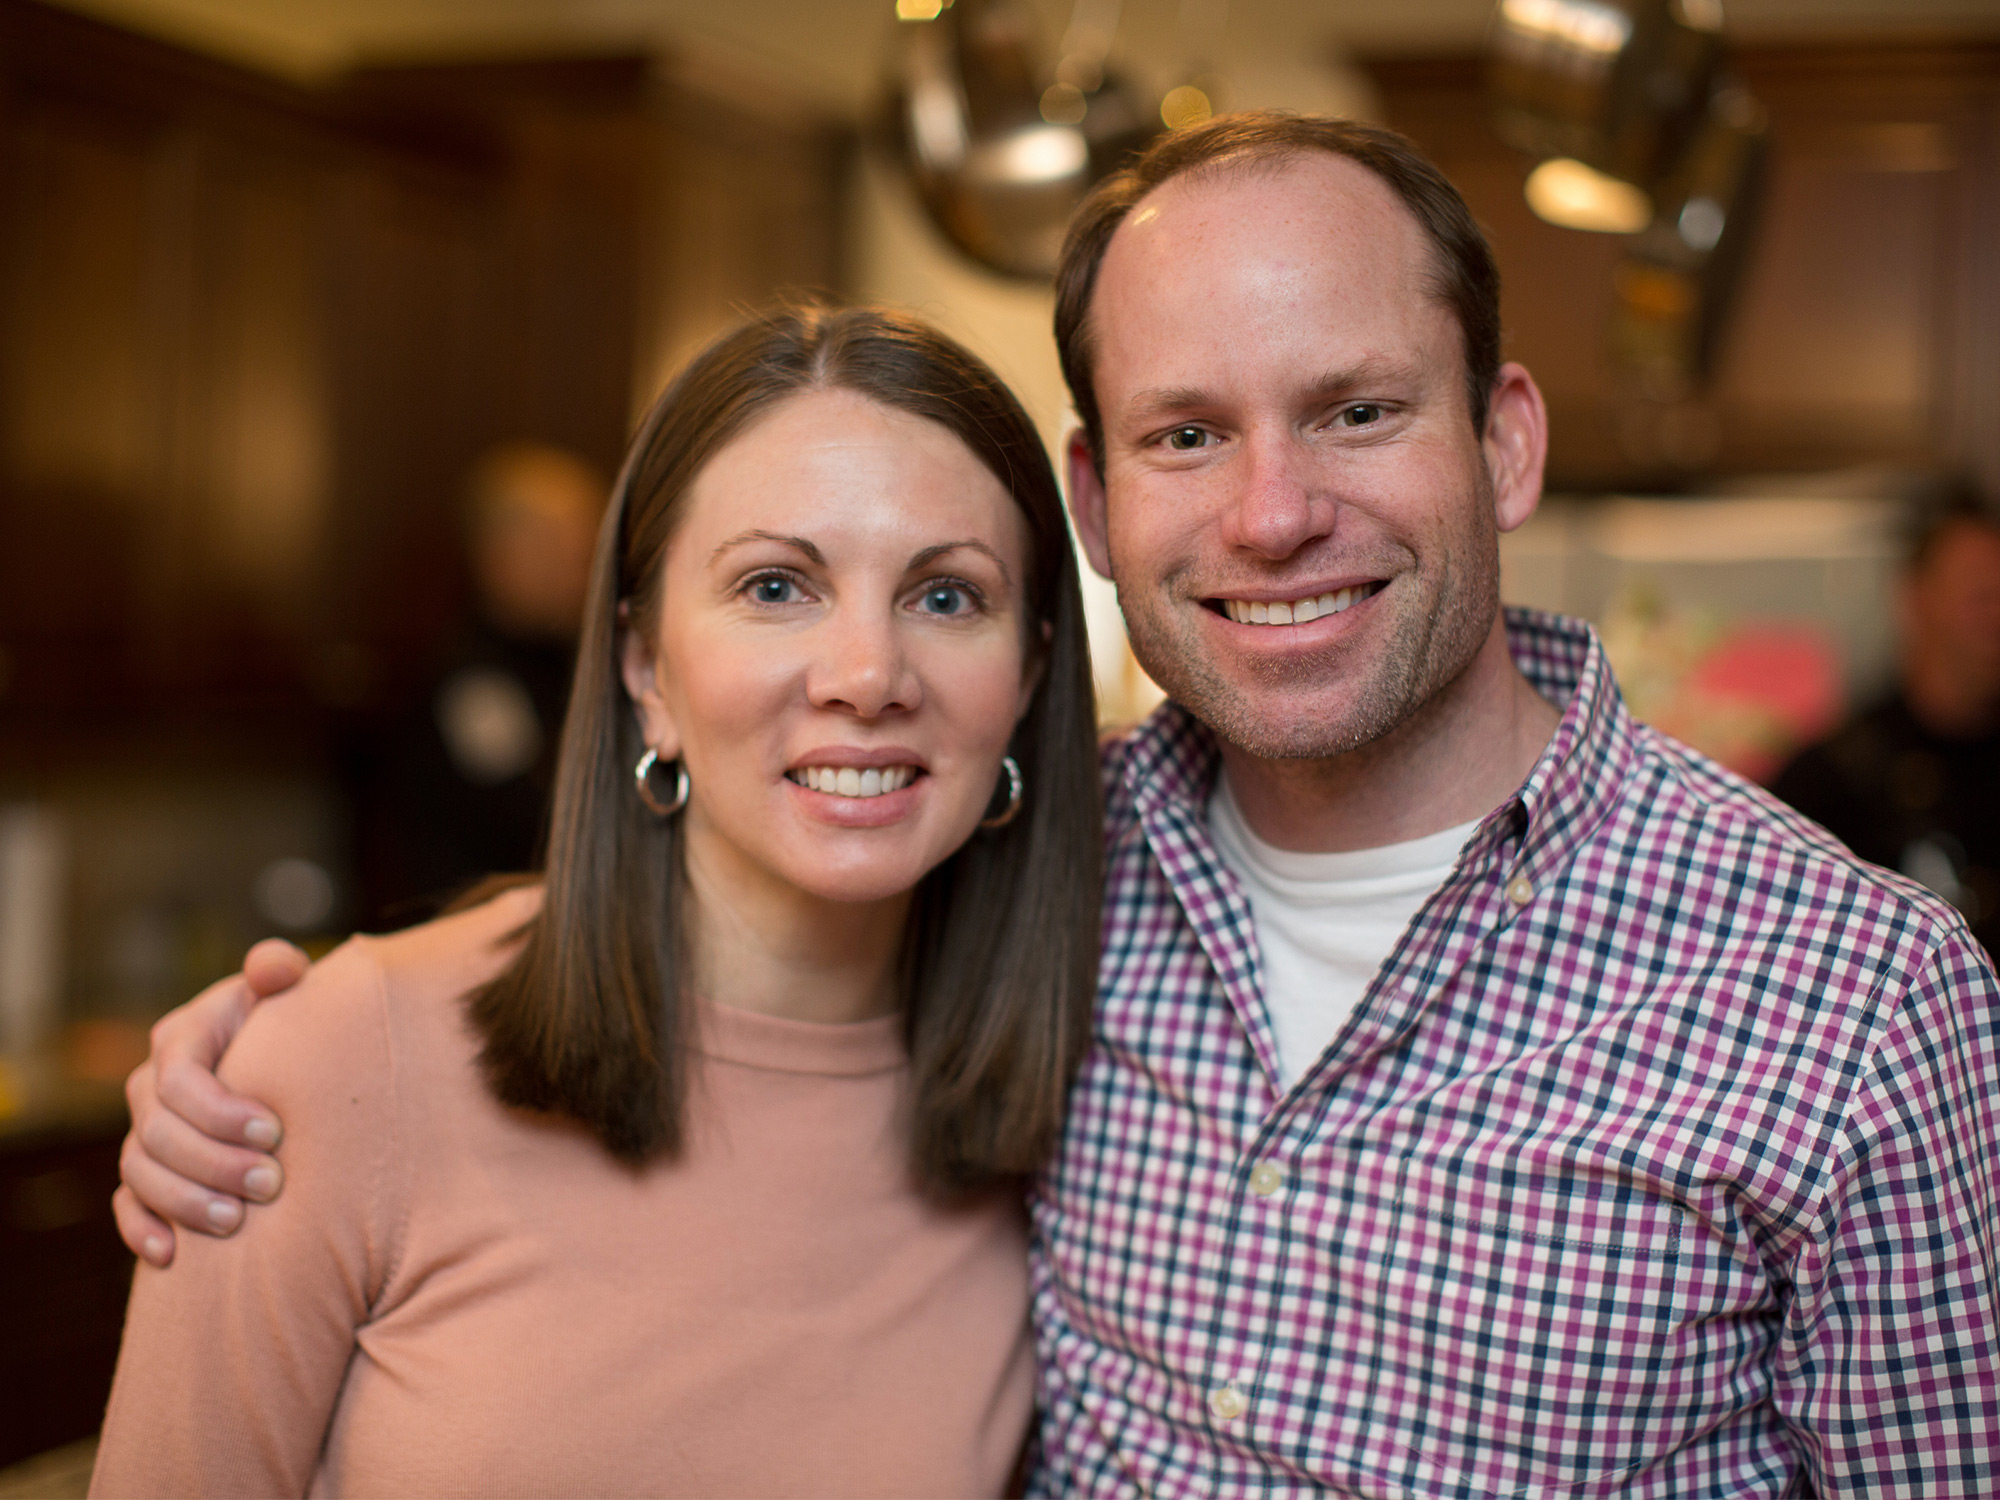 Stacey Godfrey Evans and Andrew Evans: Opening doors for others